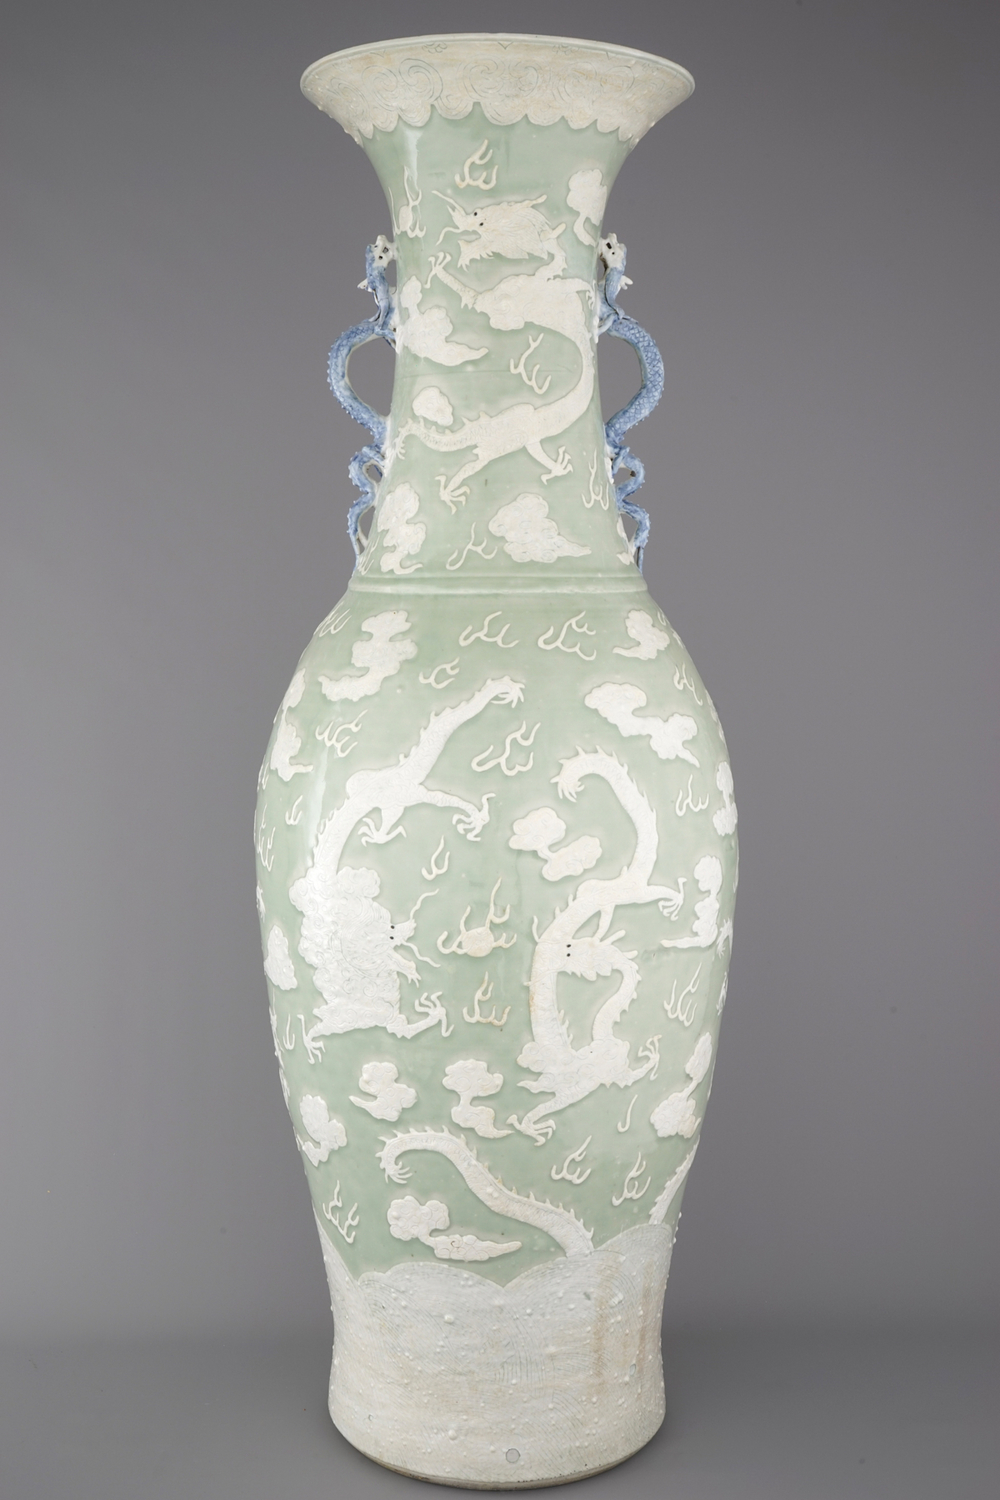 A massive Chinese porcelain celadon dragon vase, early 19th C.